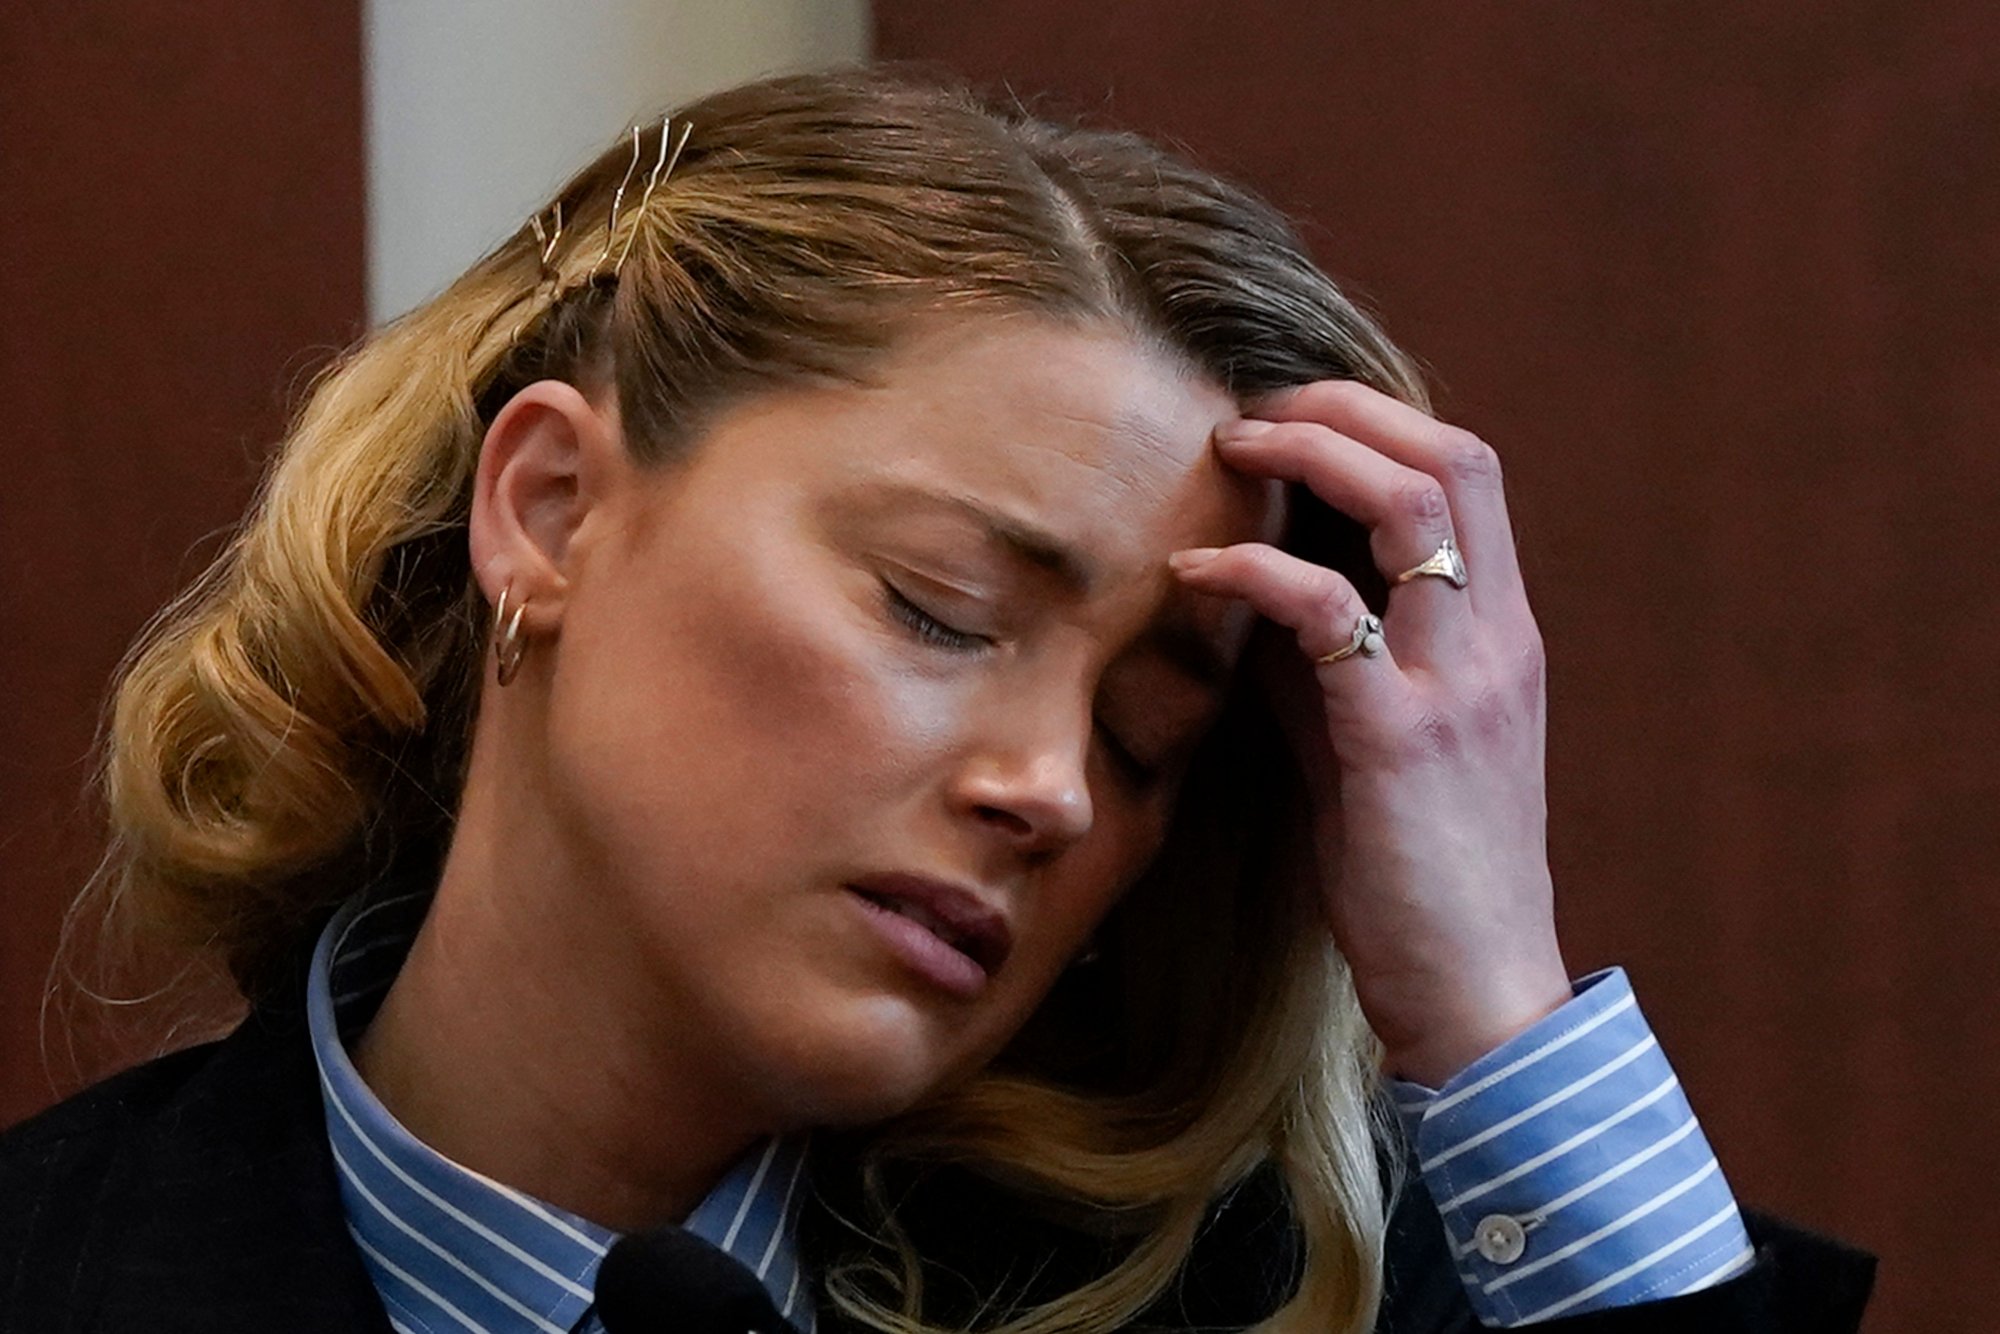 Amber Heard in trial resulting in memes. She looks distressed, wearing a suit, with her hand on her forehead and her eyes closed.